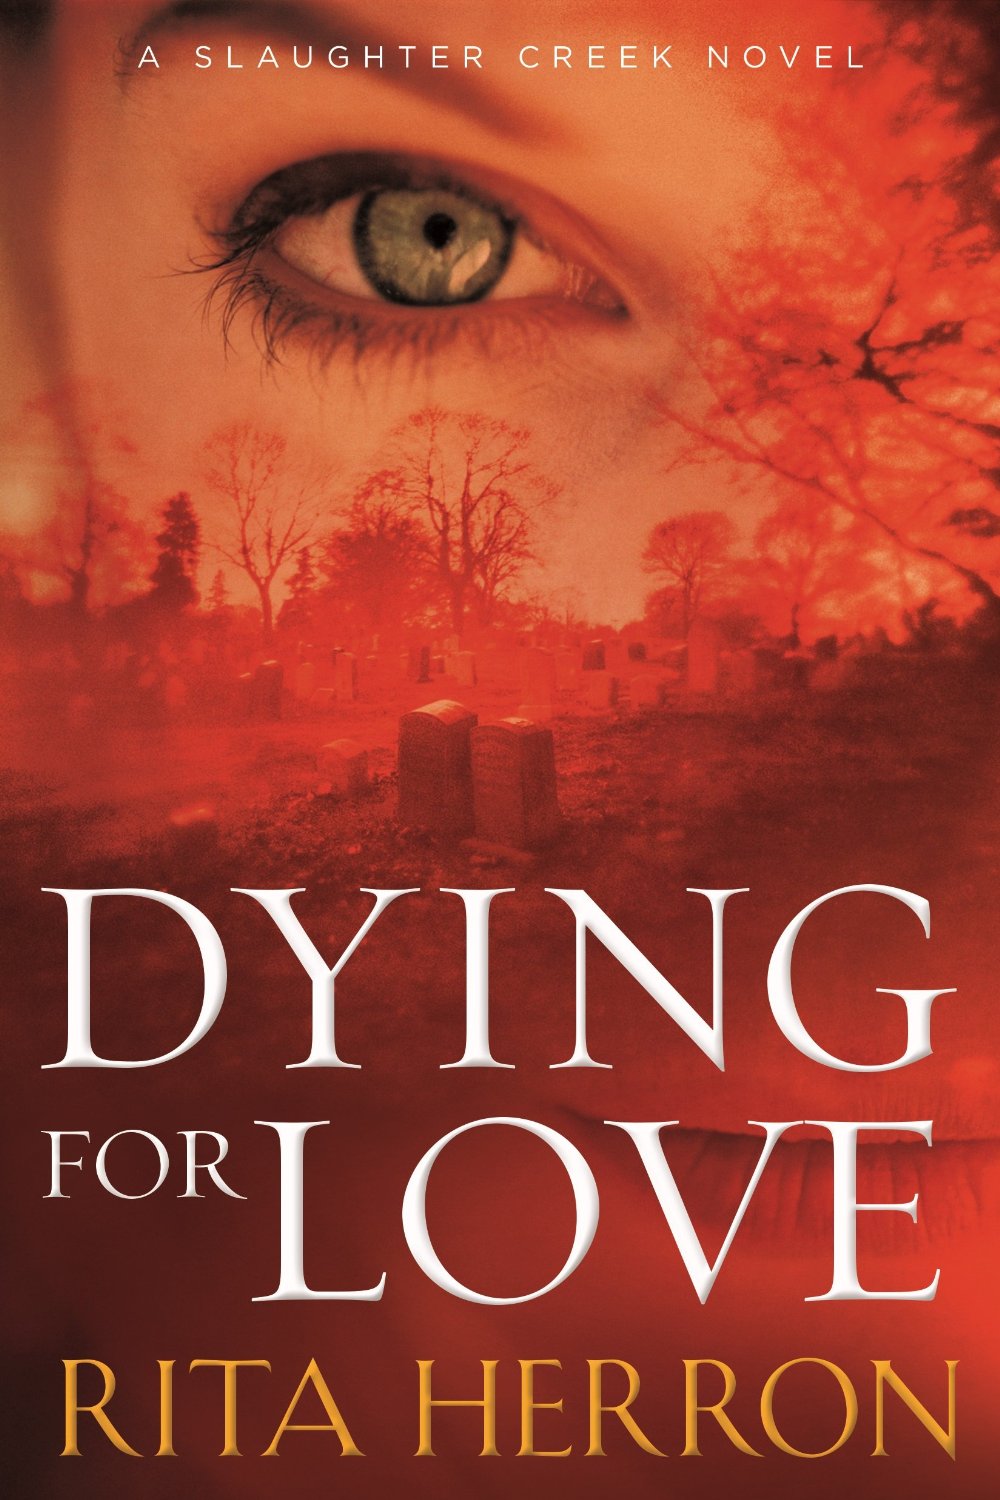 Dying for Love